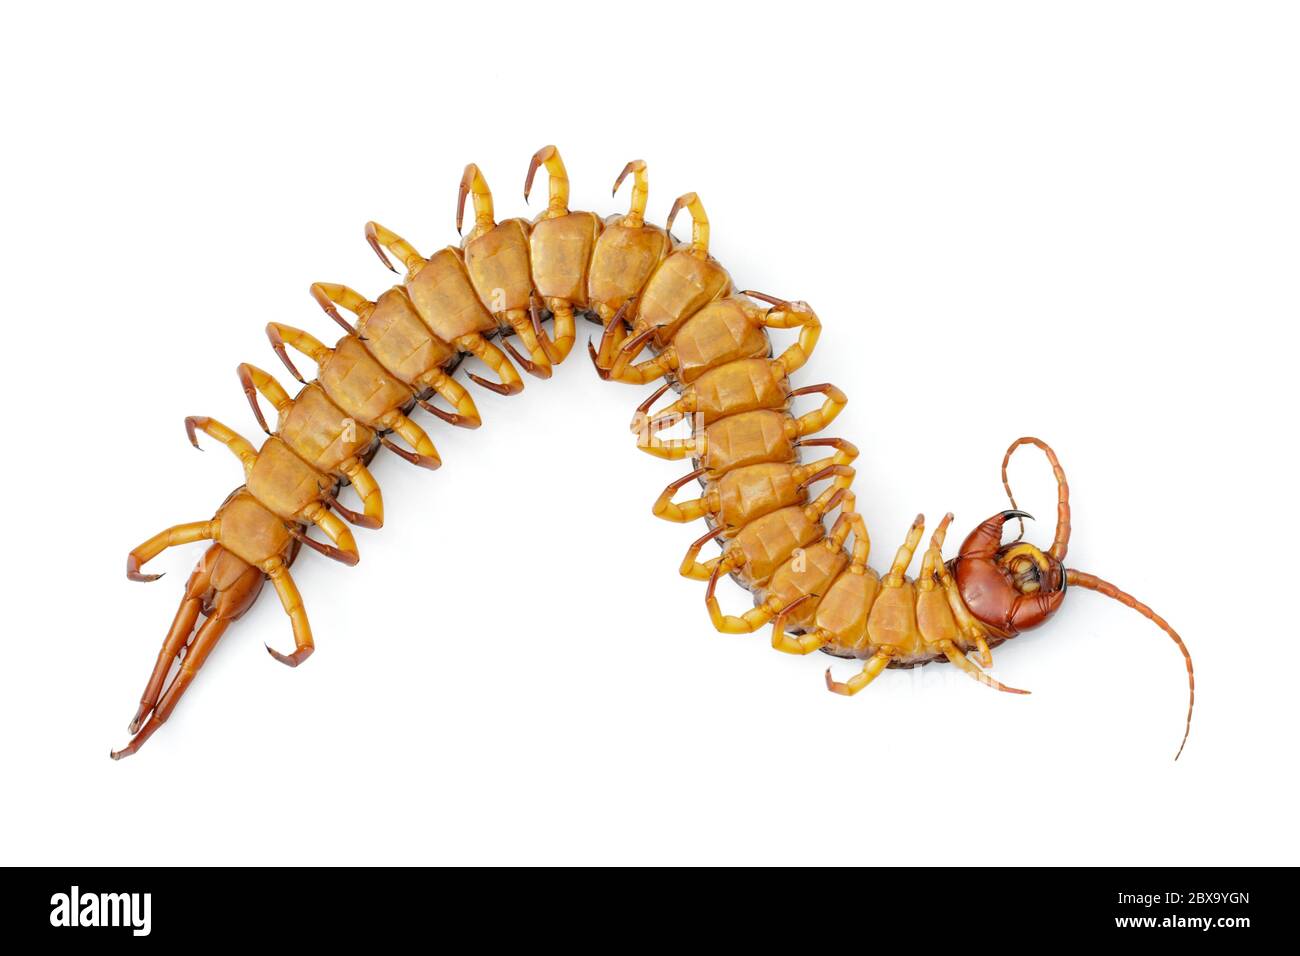 Image of dead centipedes or chilopoda isolated on white background. Animal. poisonous animals. Stock Photo